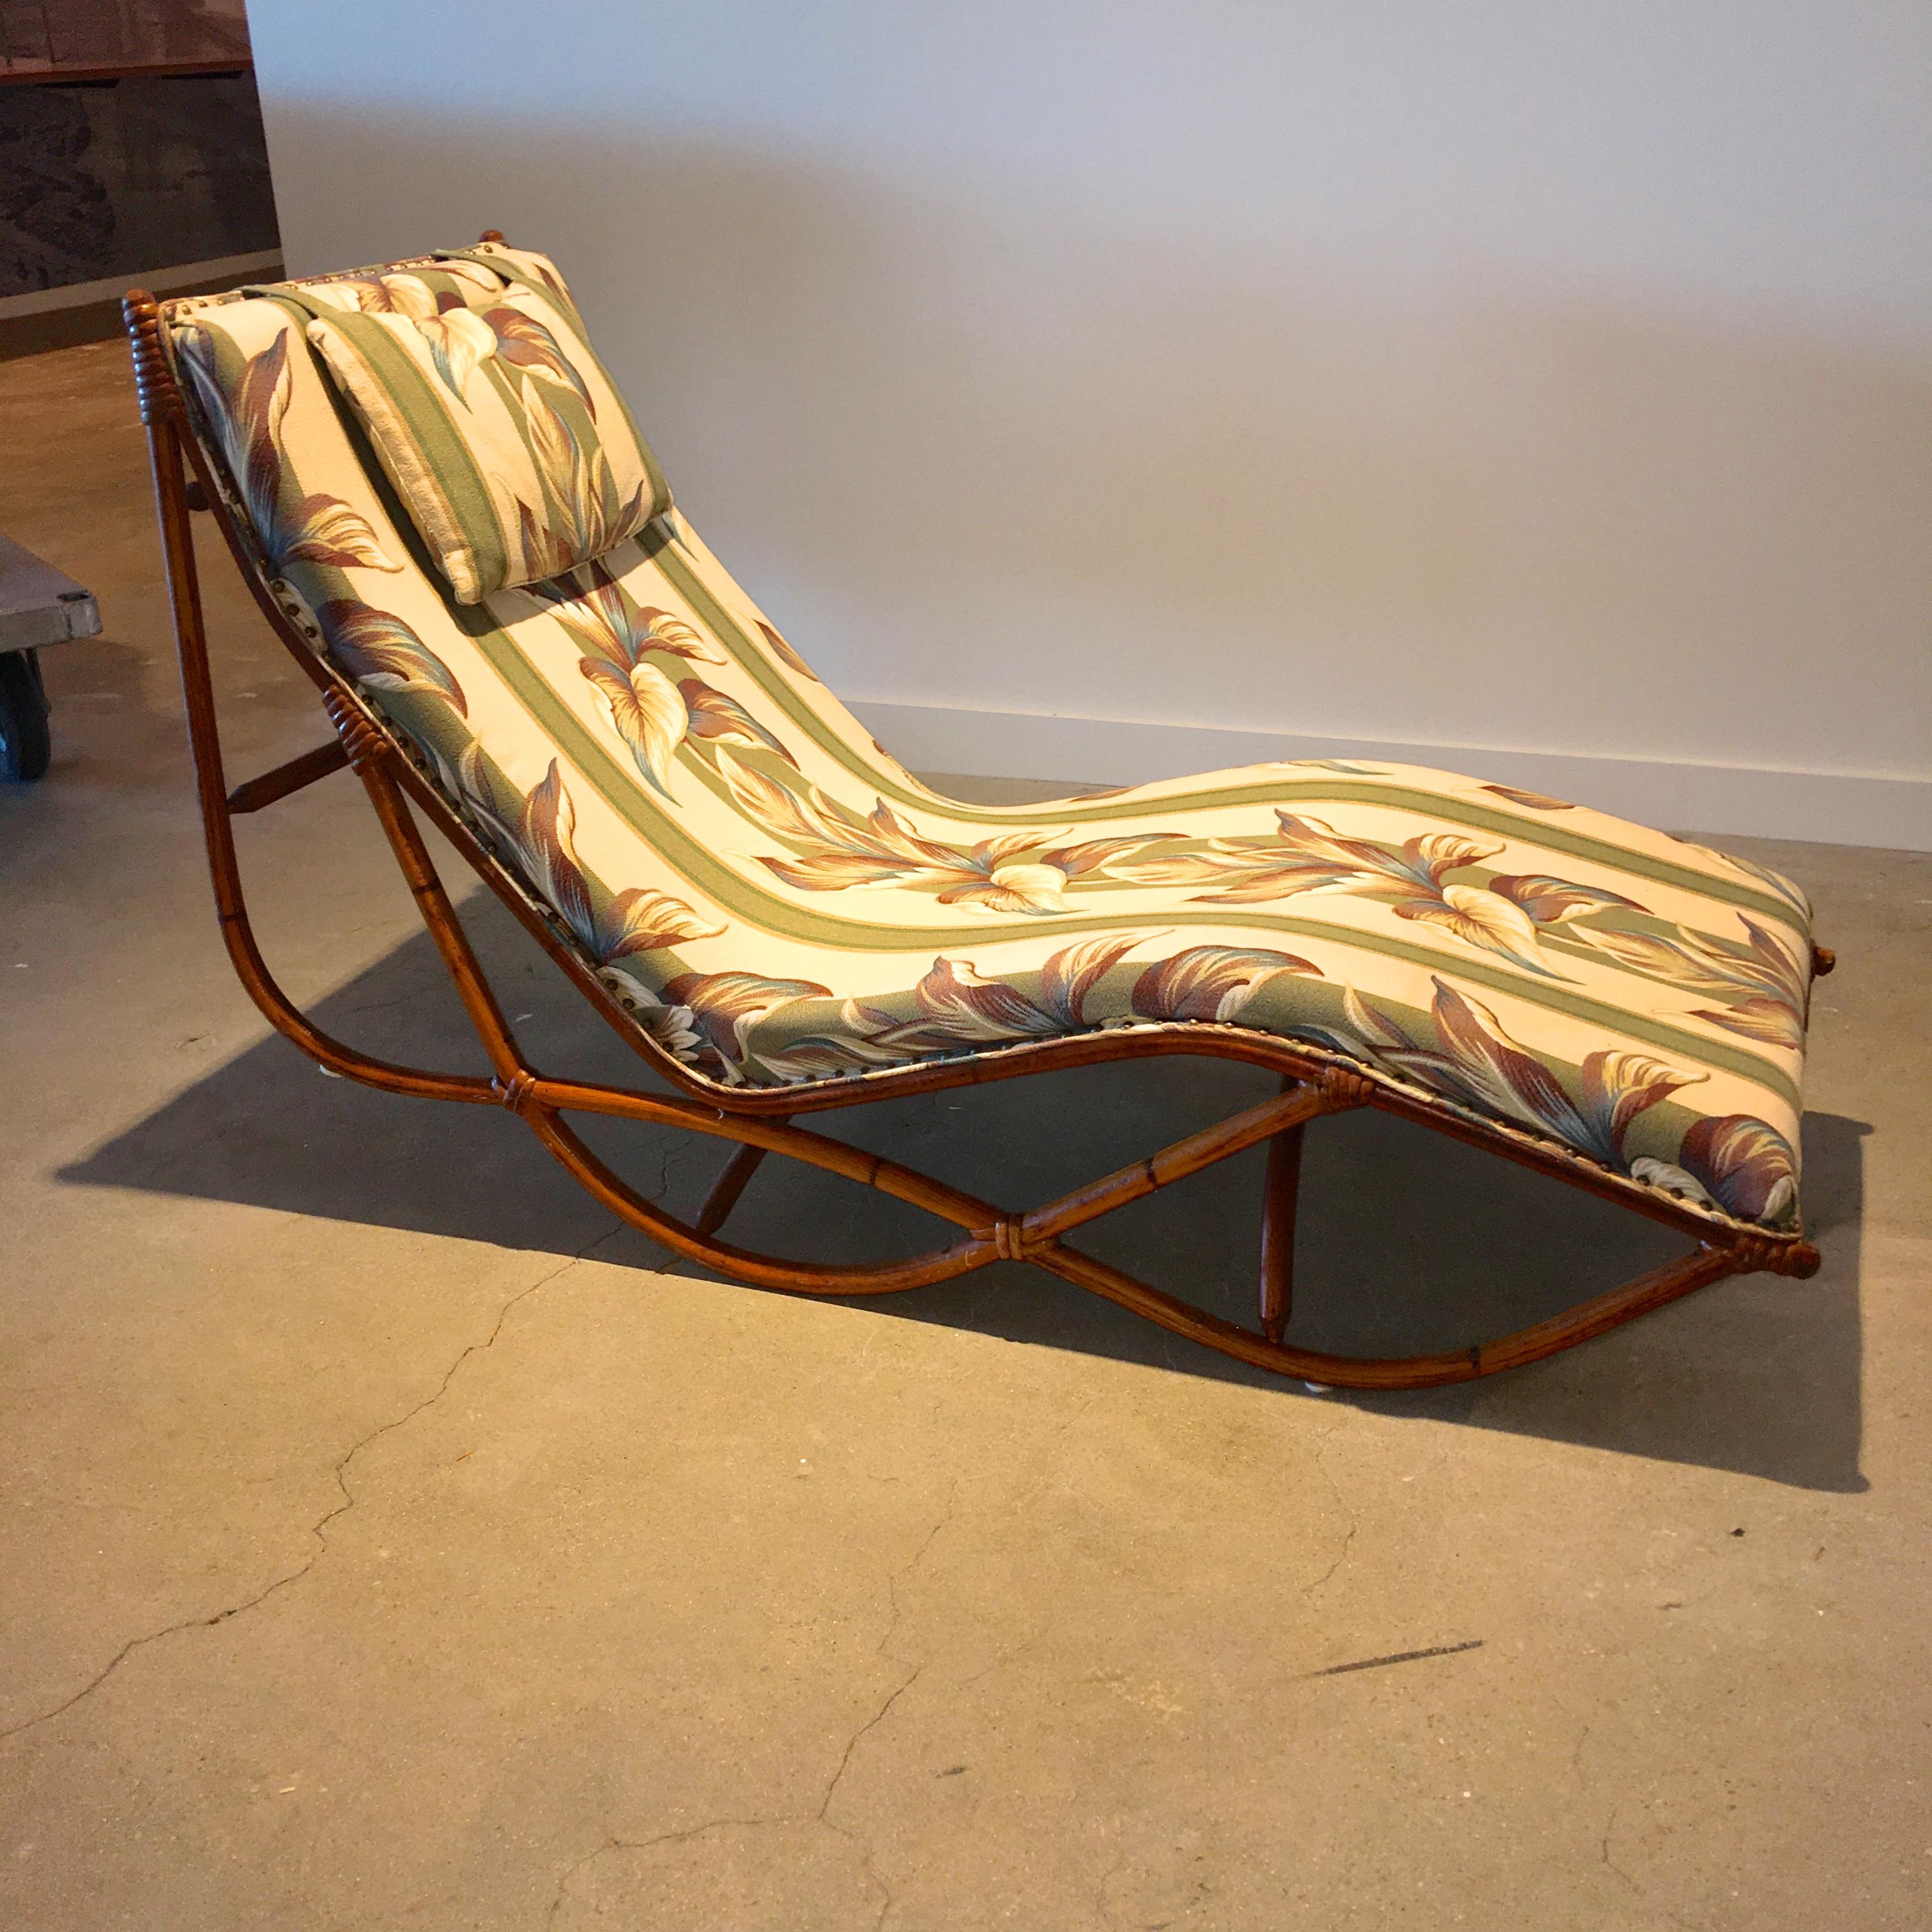 American Sleepy Hollow Chaise Lounge by Sunny Ashcraft